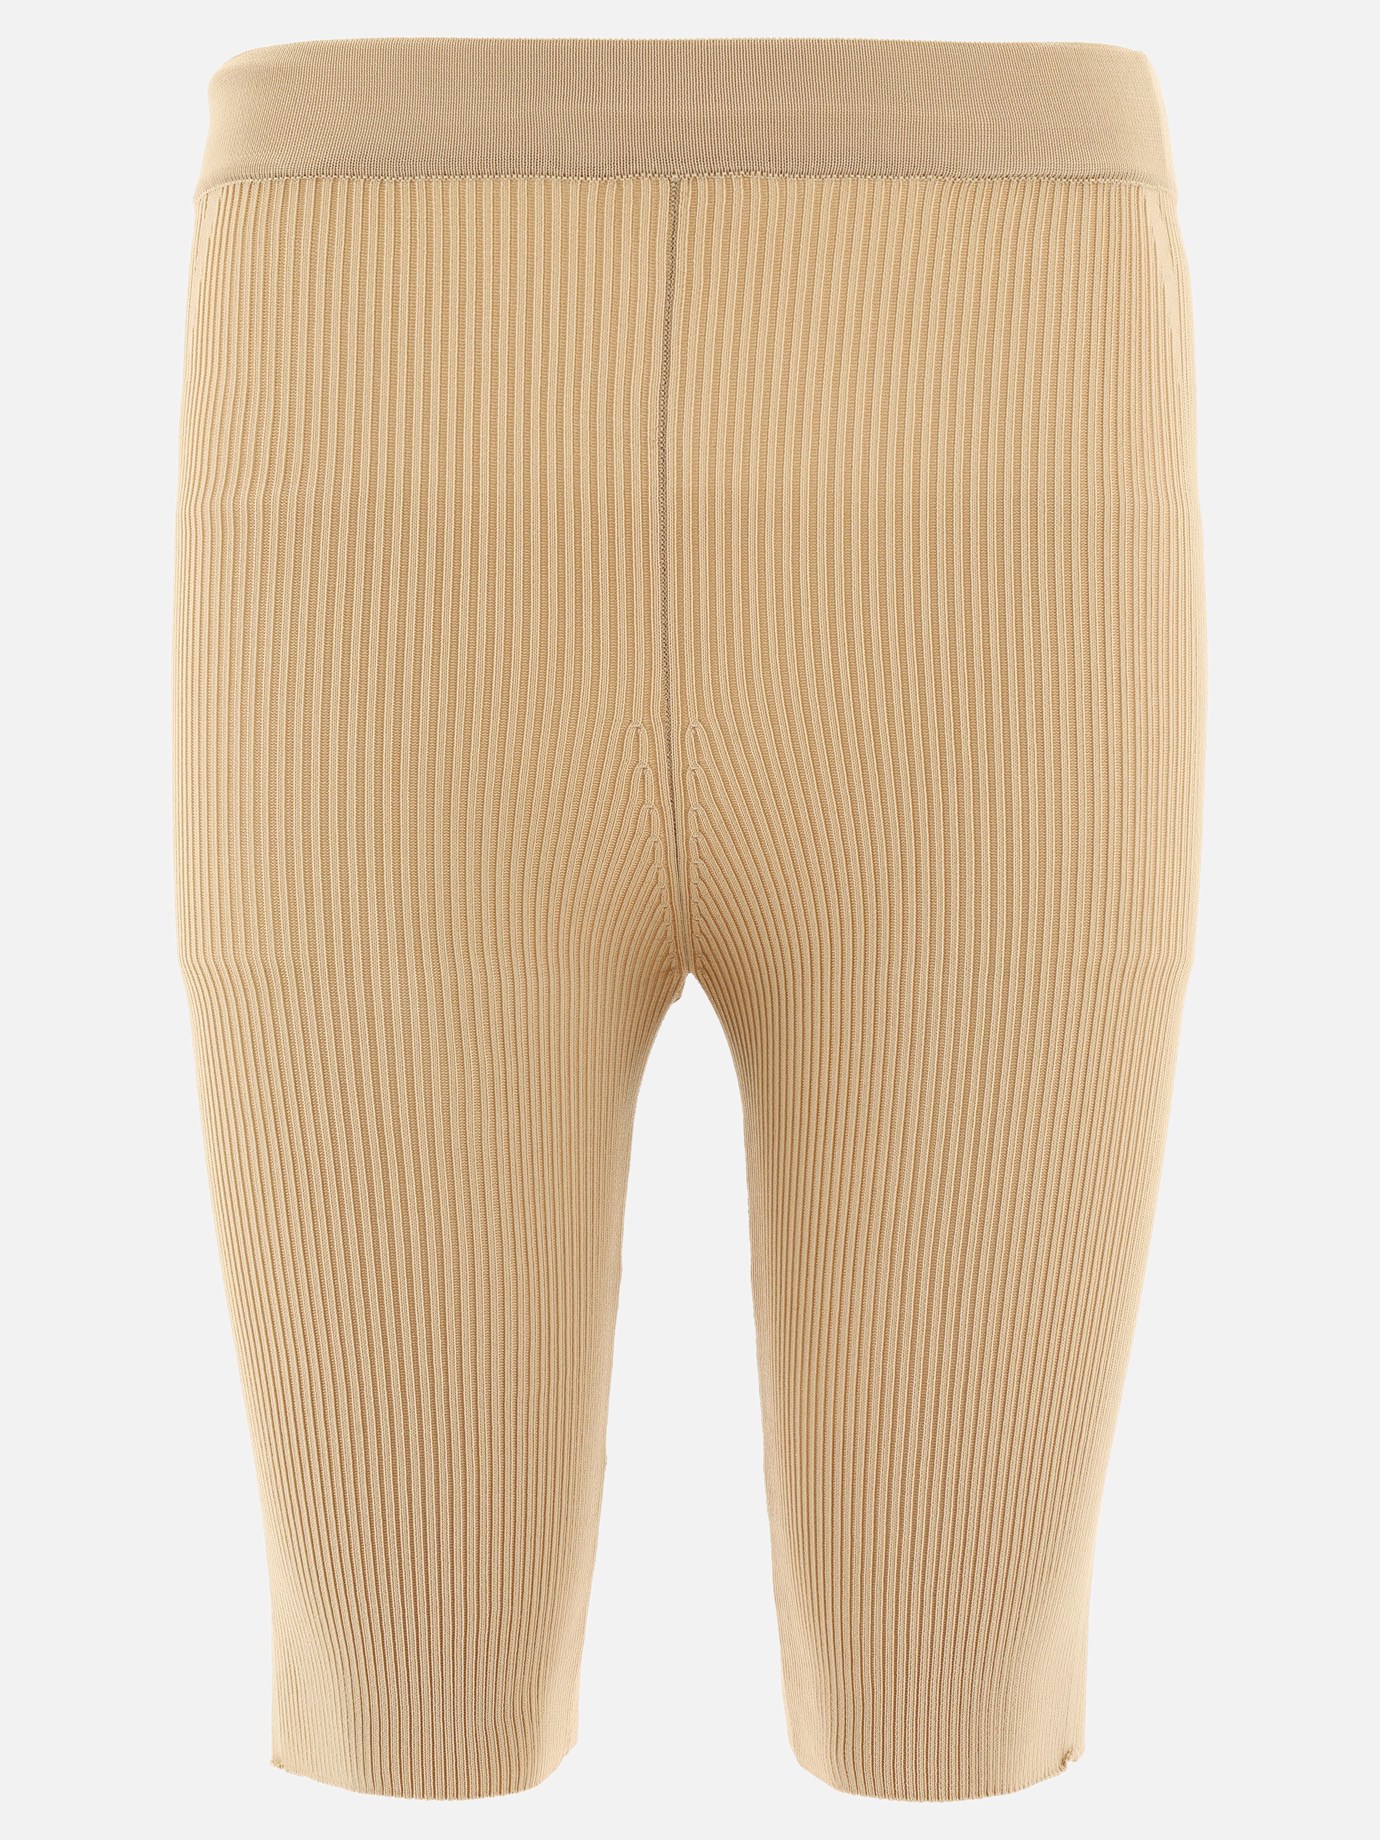  Le Short Lucca  shortsby Jacquemus - 5